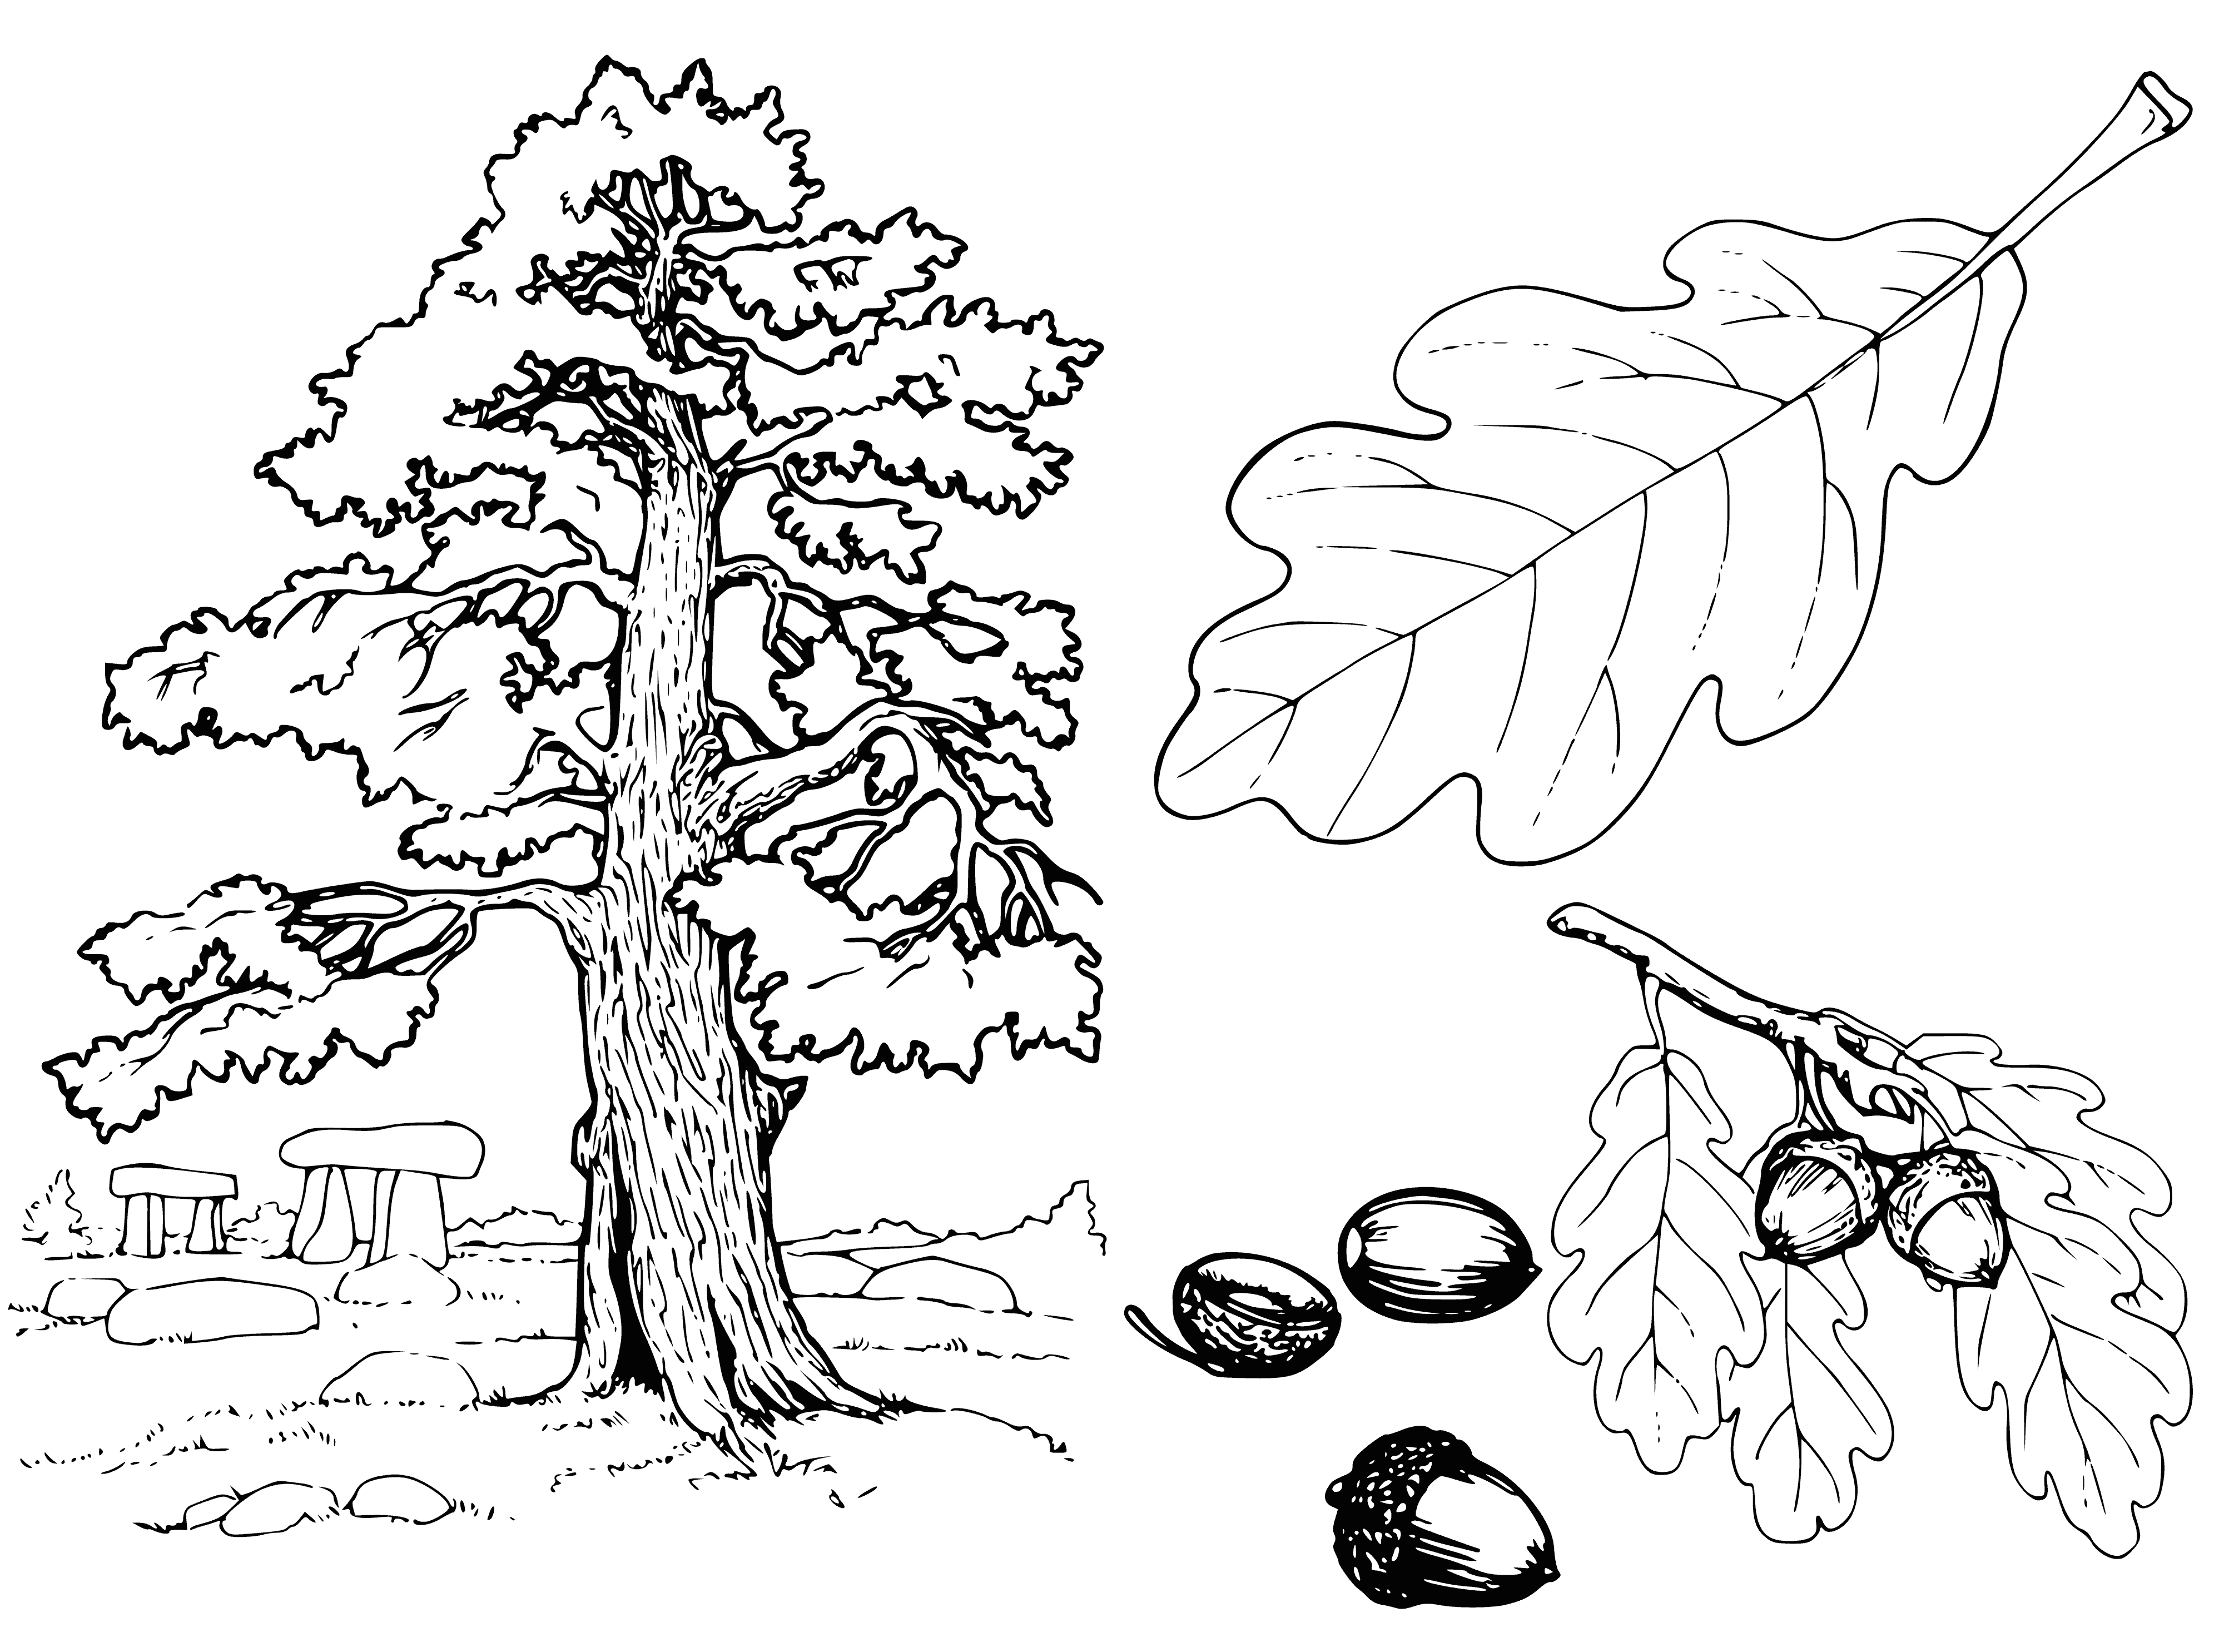 coloring page: Green, oval leaves w/ pointy ends on light-brown tree w/ smooth texture in a field of green grass. Small branches coming off main trunk.